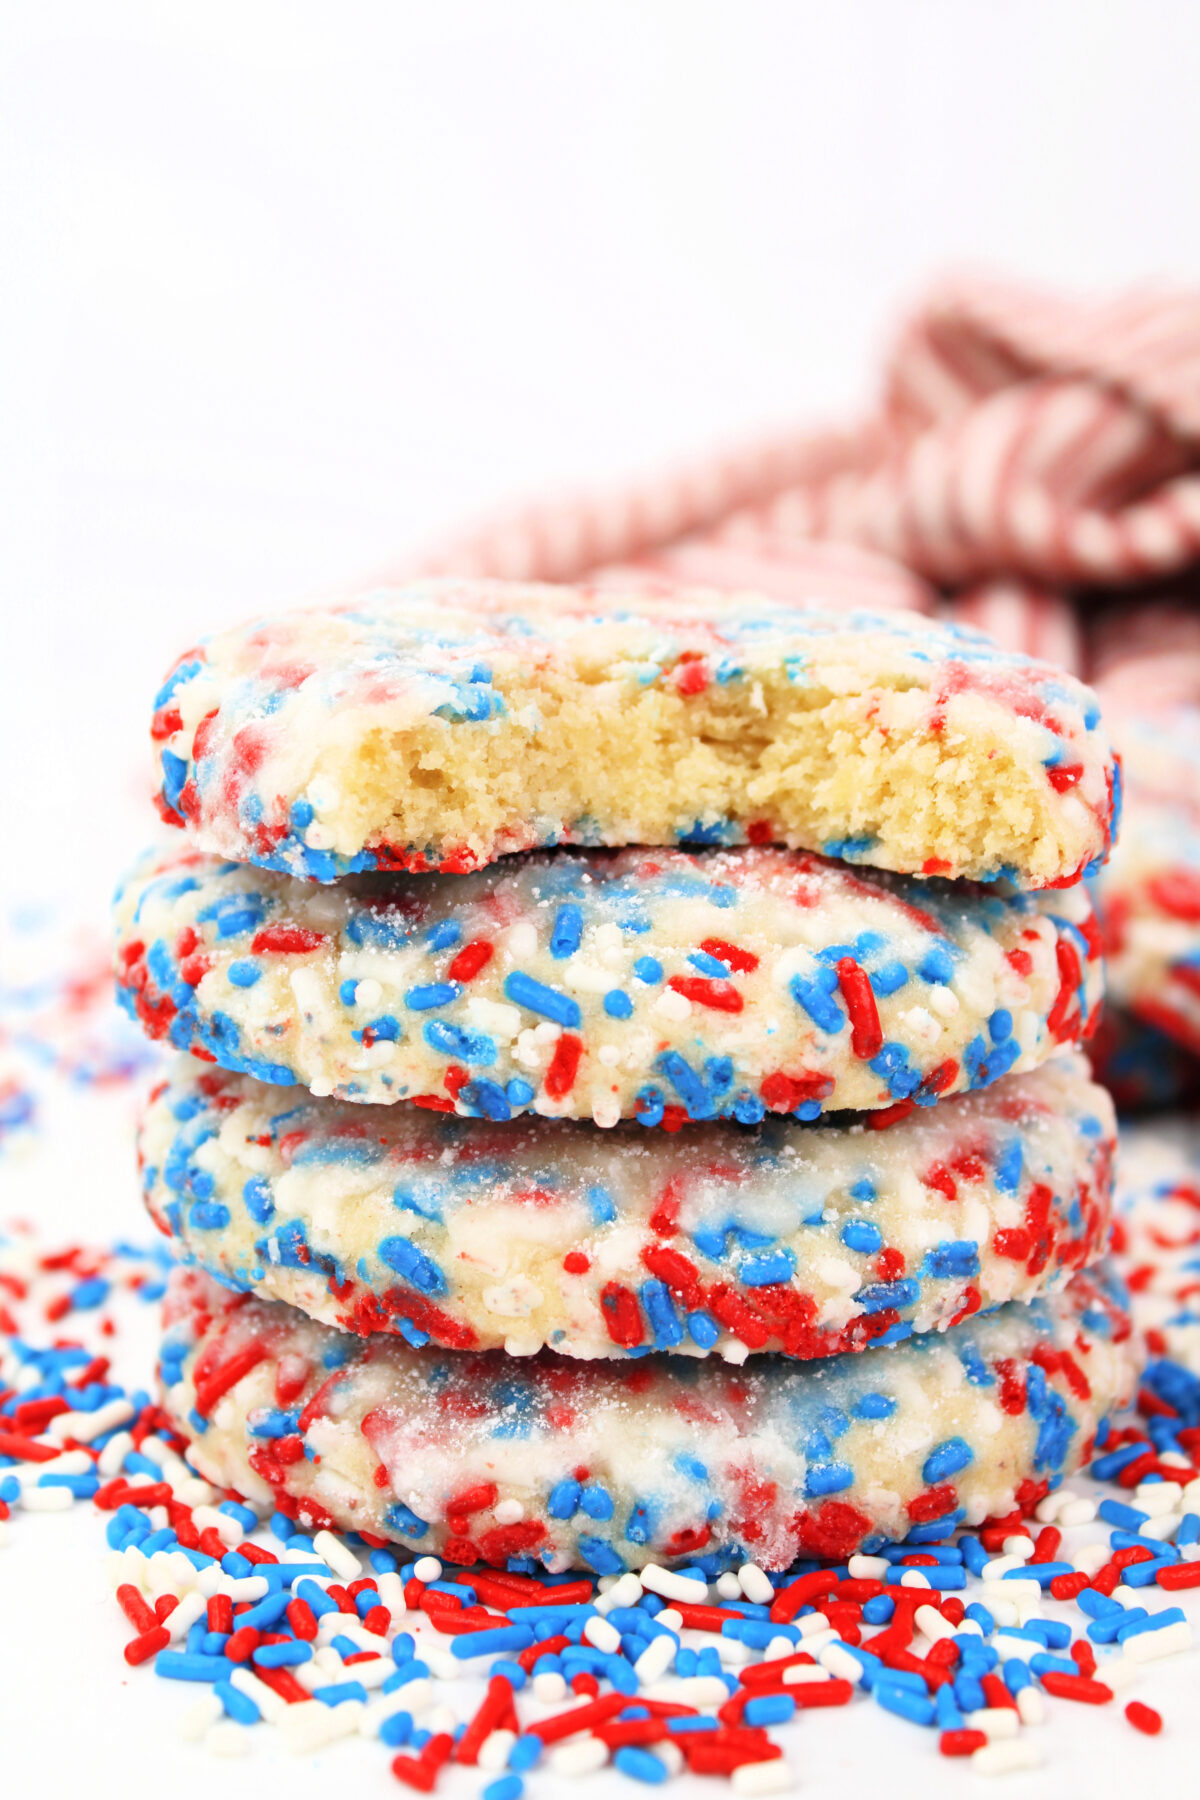 These festive red, white & blue cookies will put you in a patriotic mood. Patriotic funfetti cookies are the perfect way to celebrate!